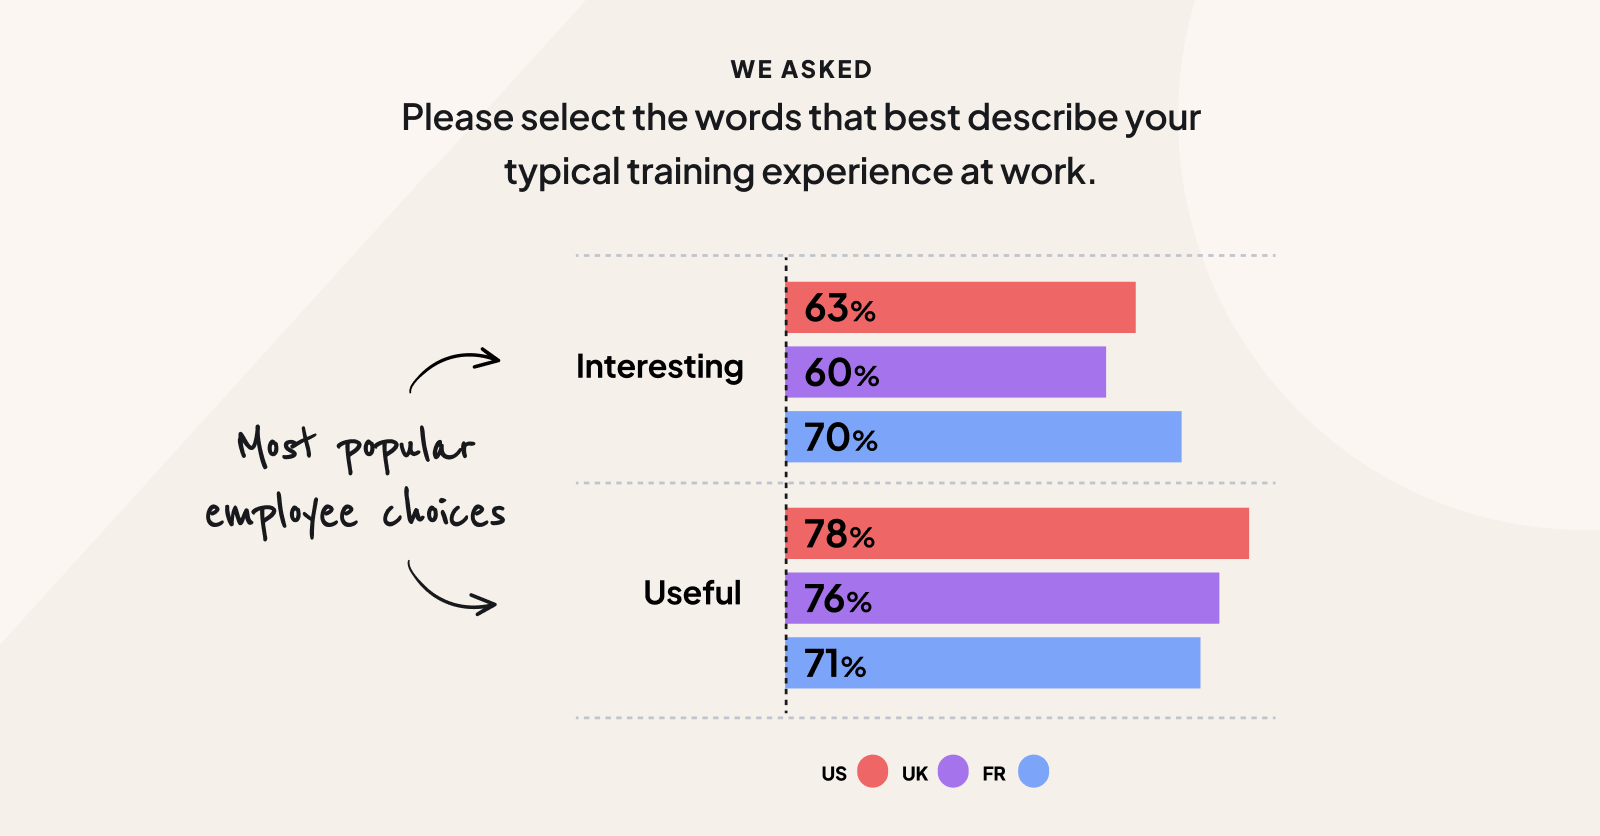 Employees find their training interesting and useful